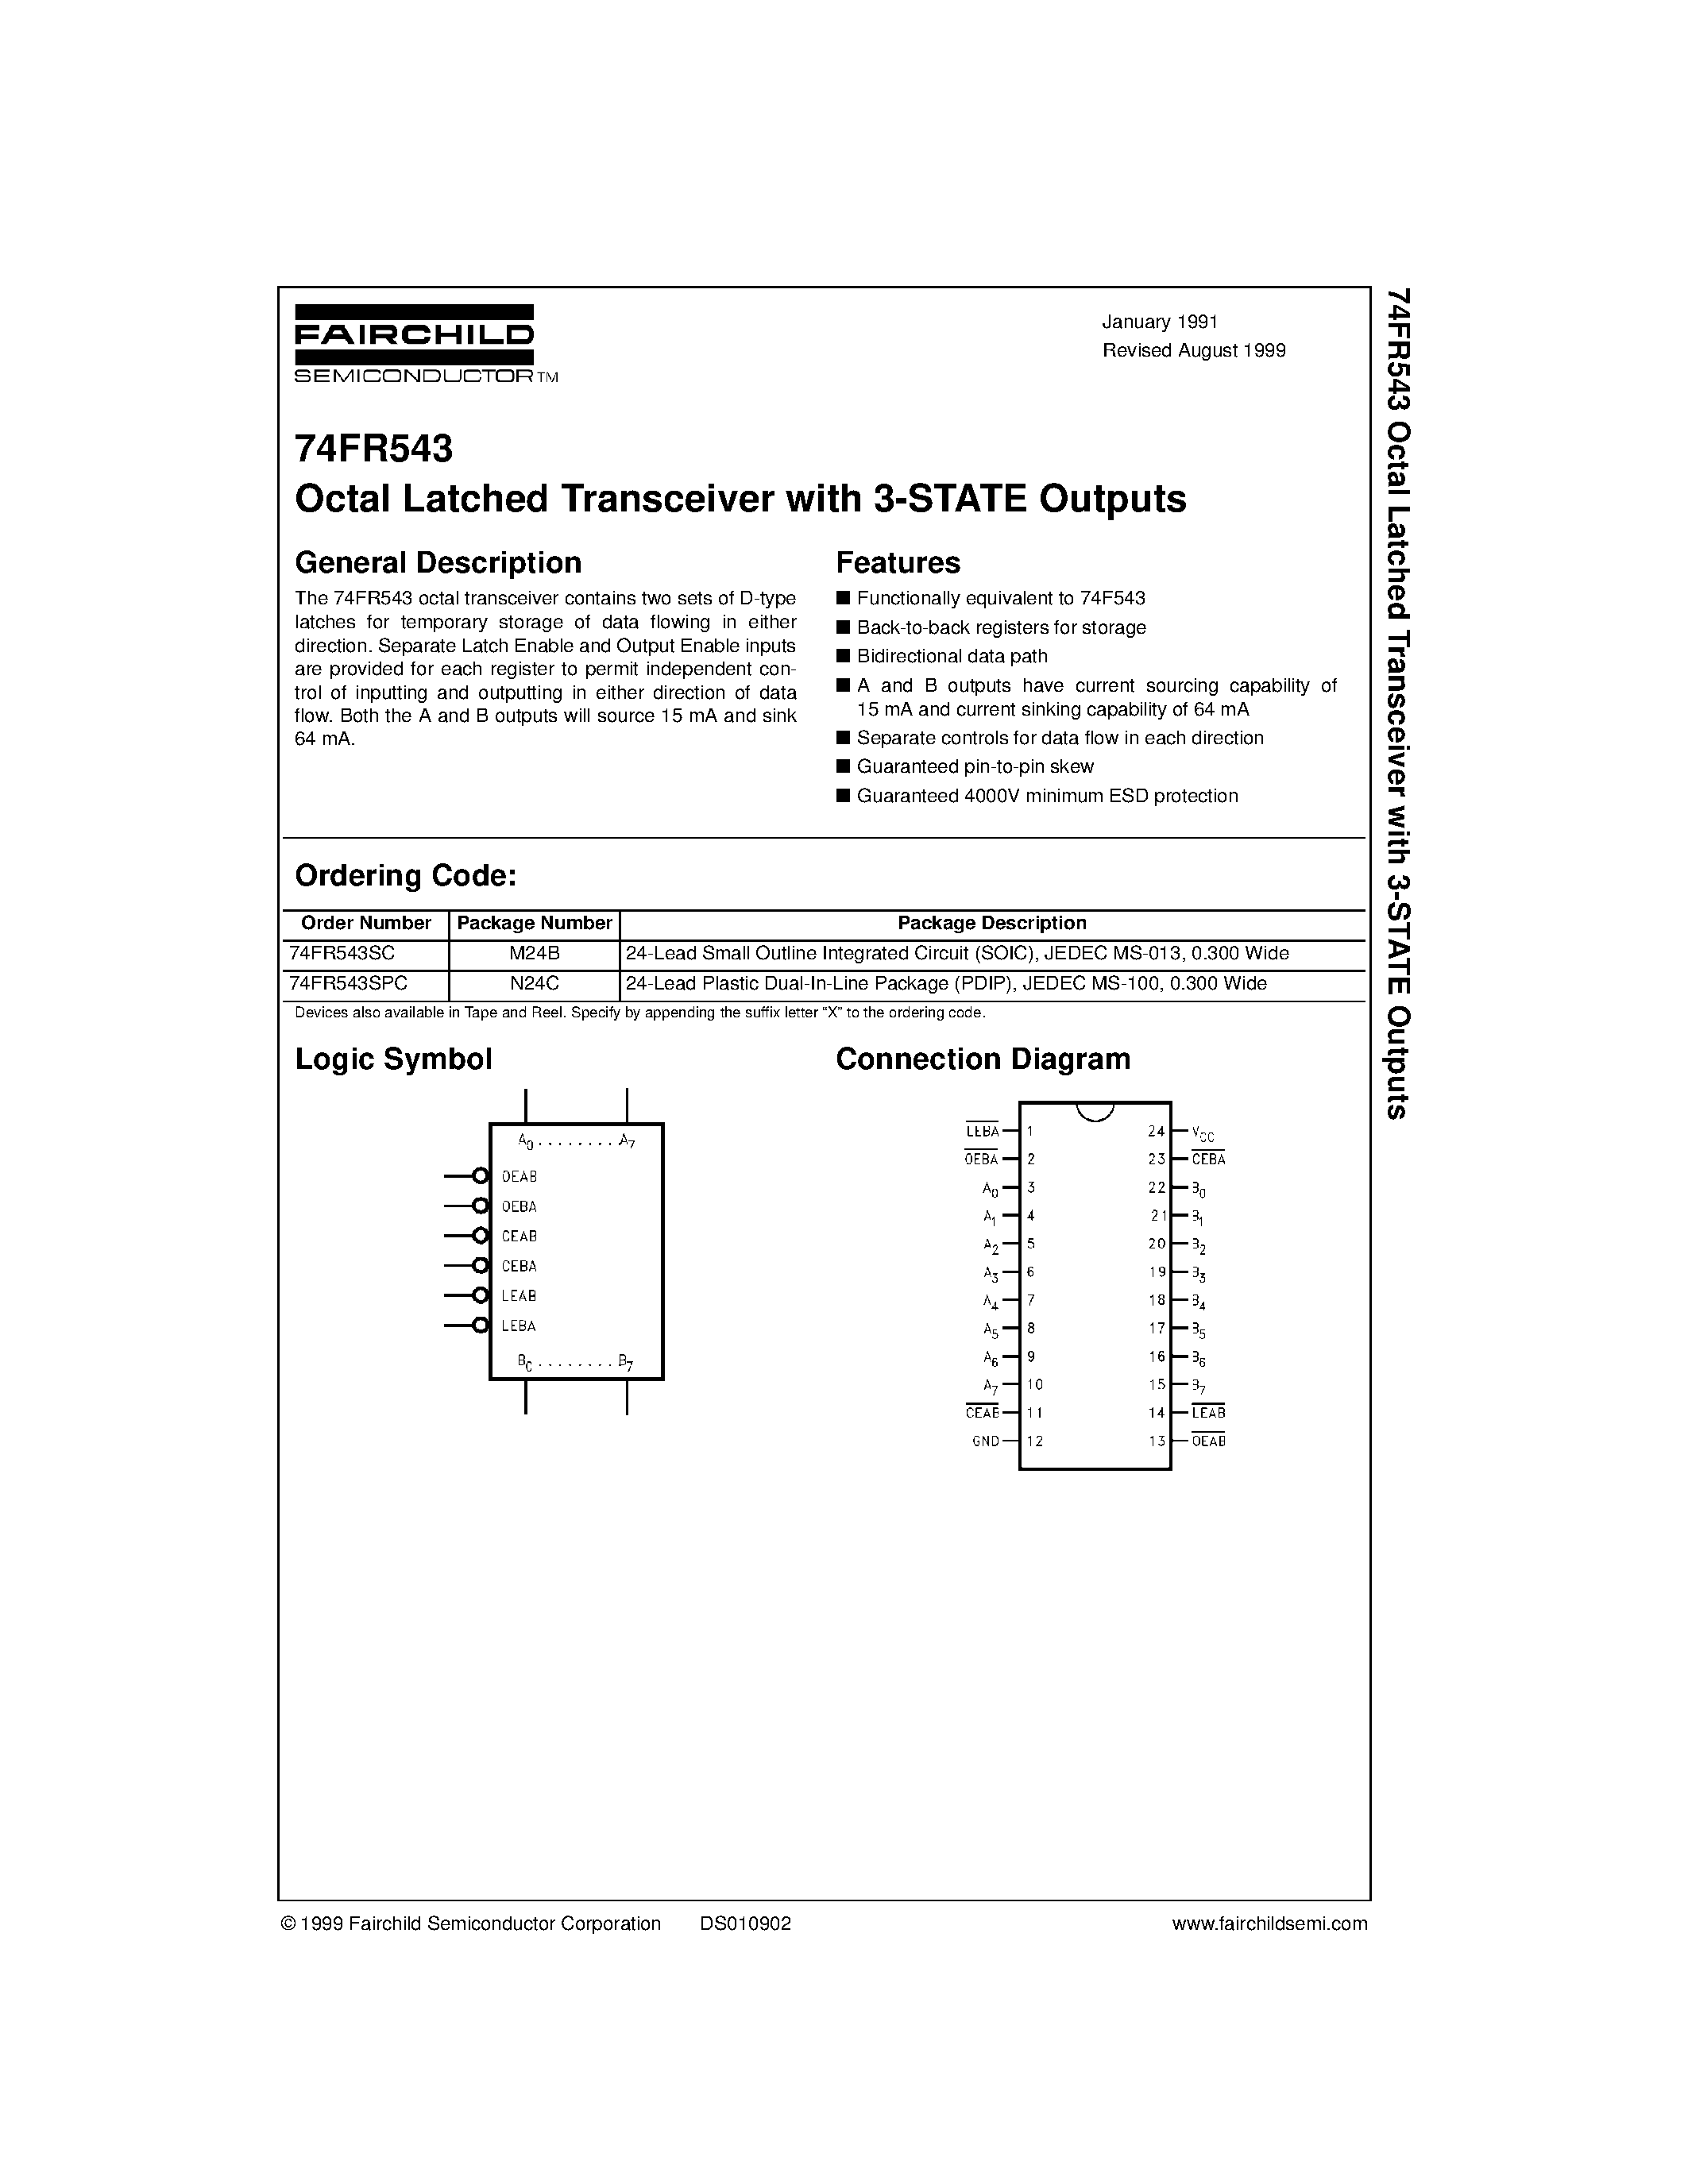 Datasheet 74FR543SPC - Octal Latched Transceiver with 3-STATE Outputs page 1